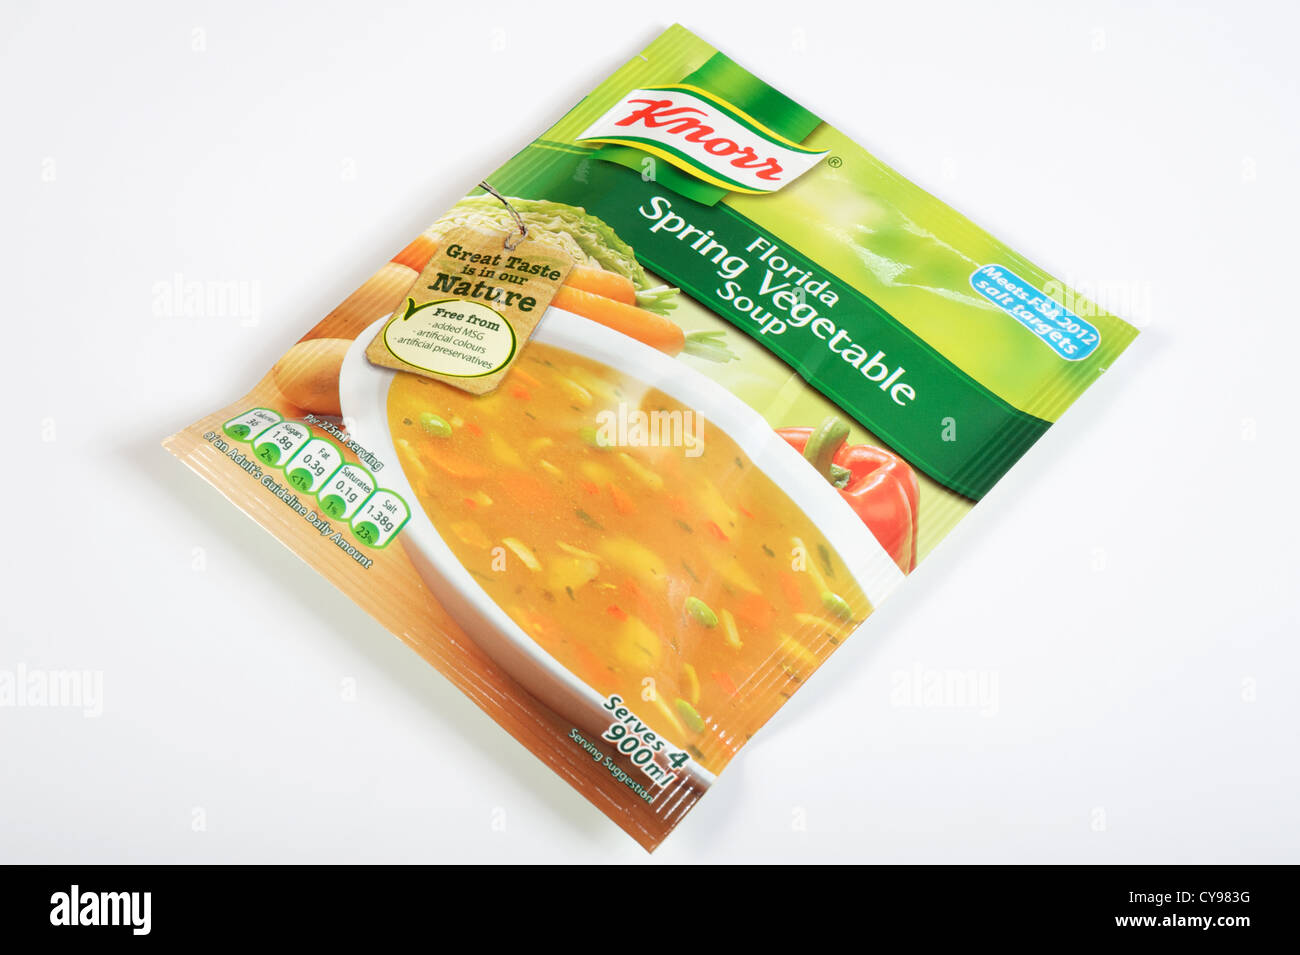 Knorr Florida Spring vegetable soup Stock Photo